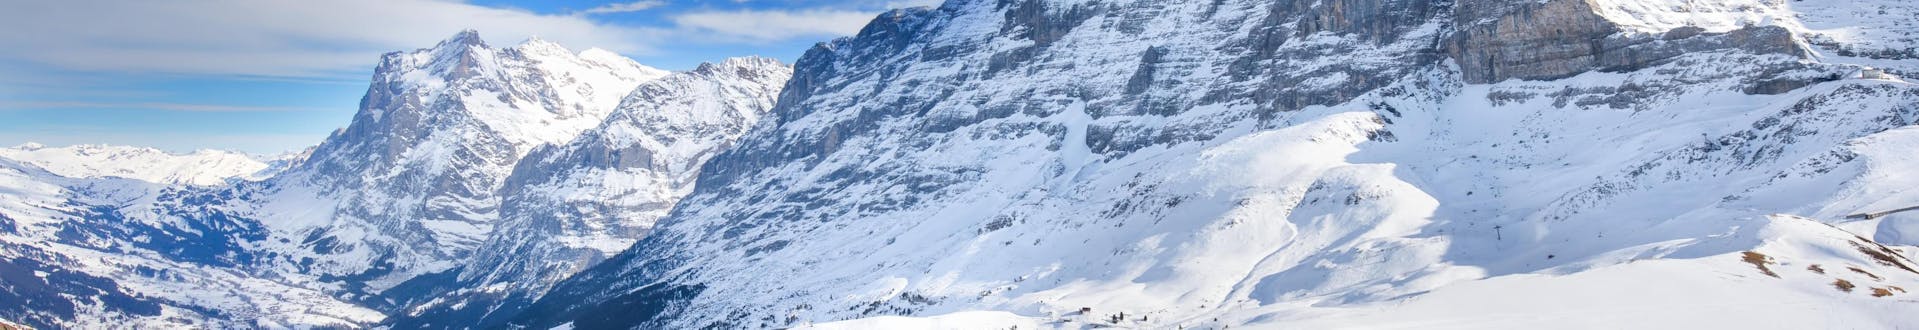 View of the snowy slopes of Grindelwald in the Jungfrau region, where many ski schools offer their ski lessons.